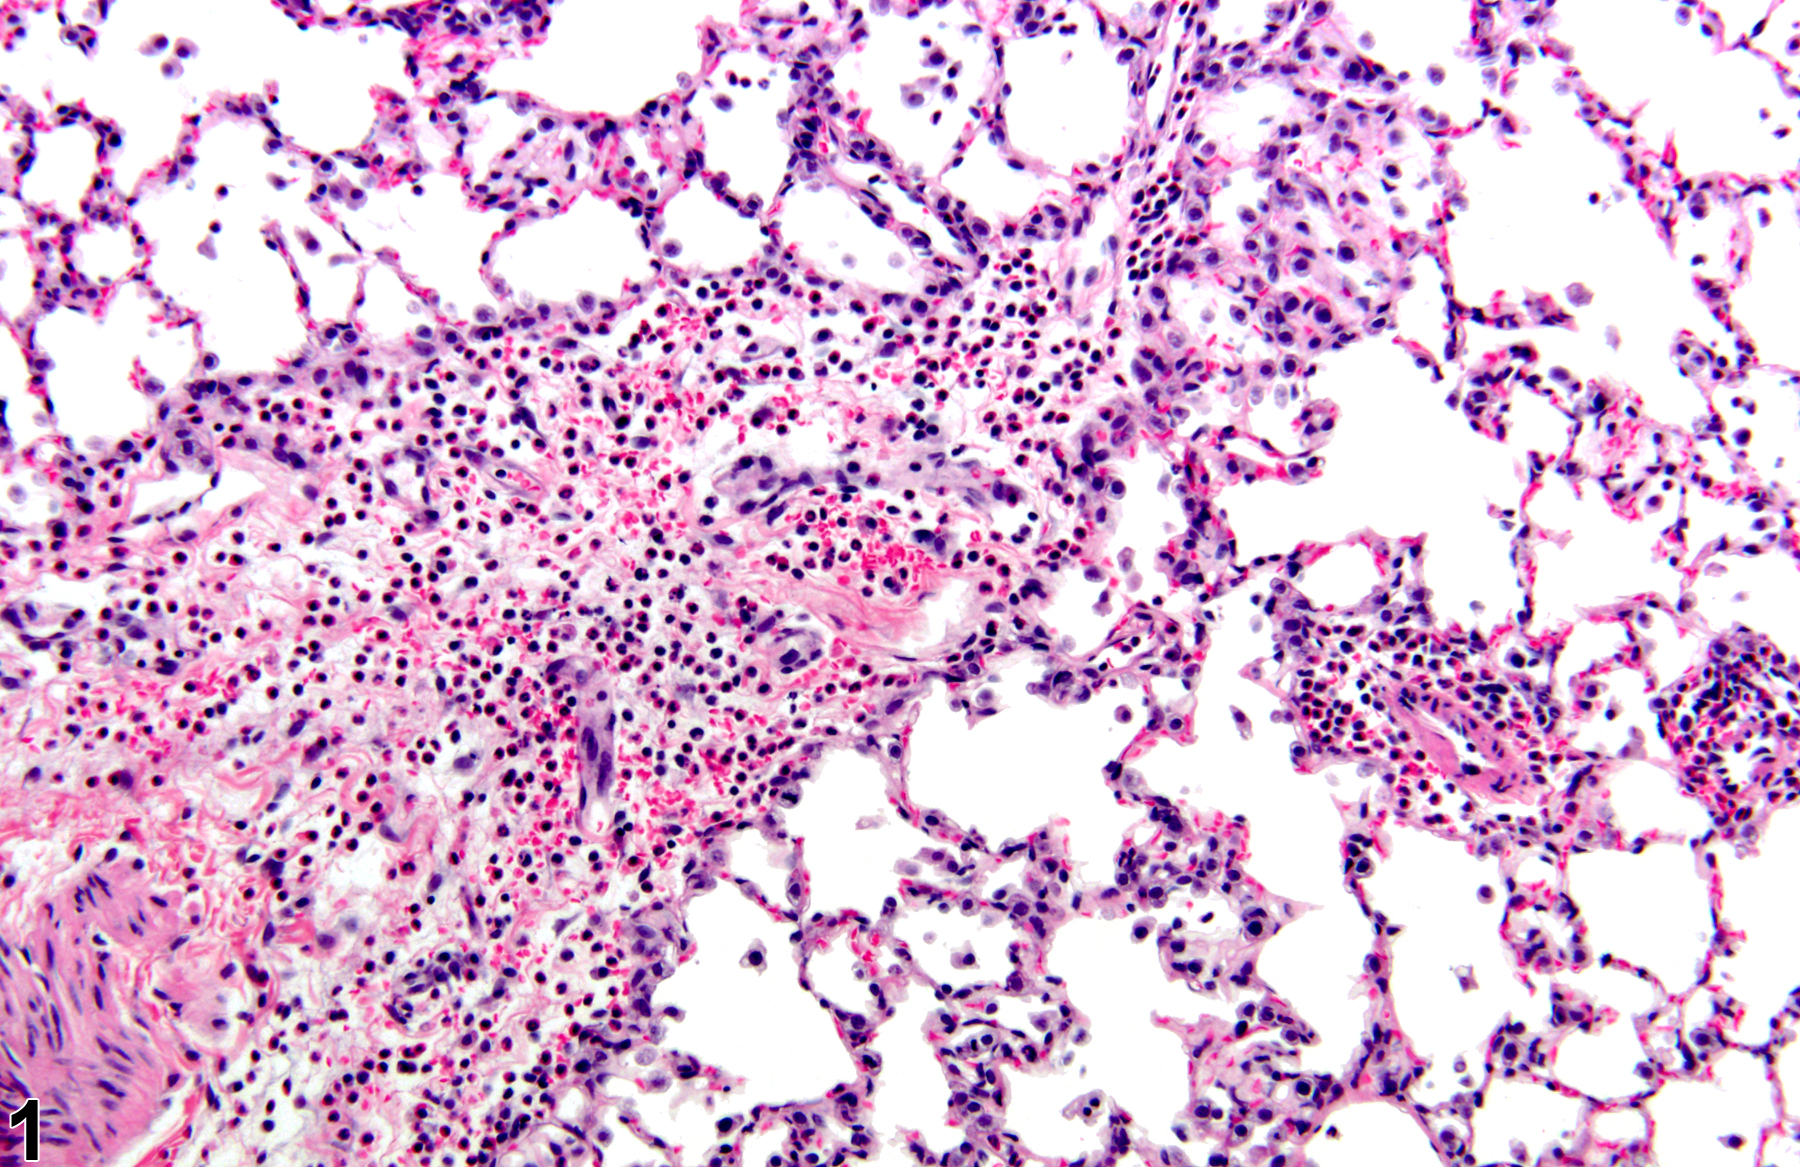 Image of acute inflammation in the lung from a male Wistar Han rat in a subchronic study